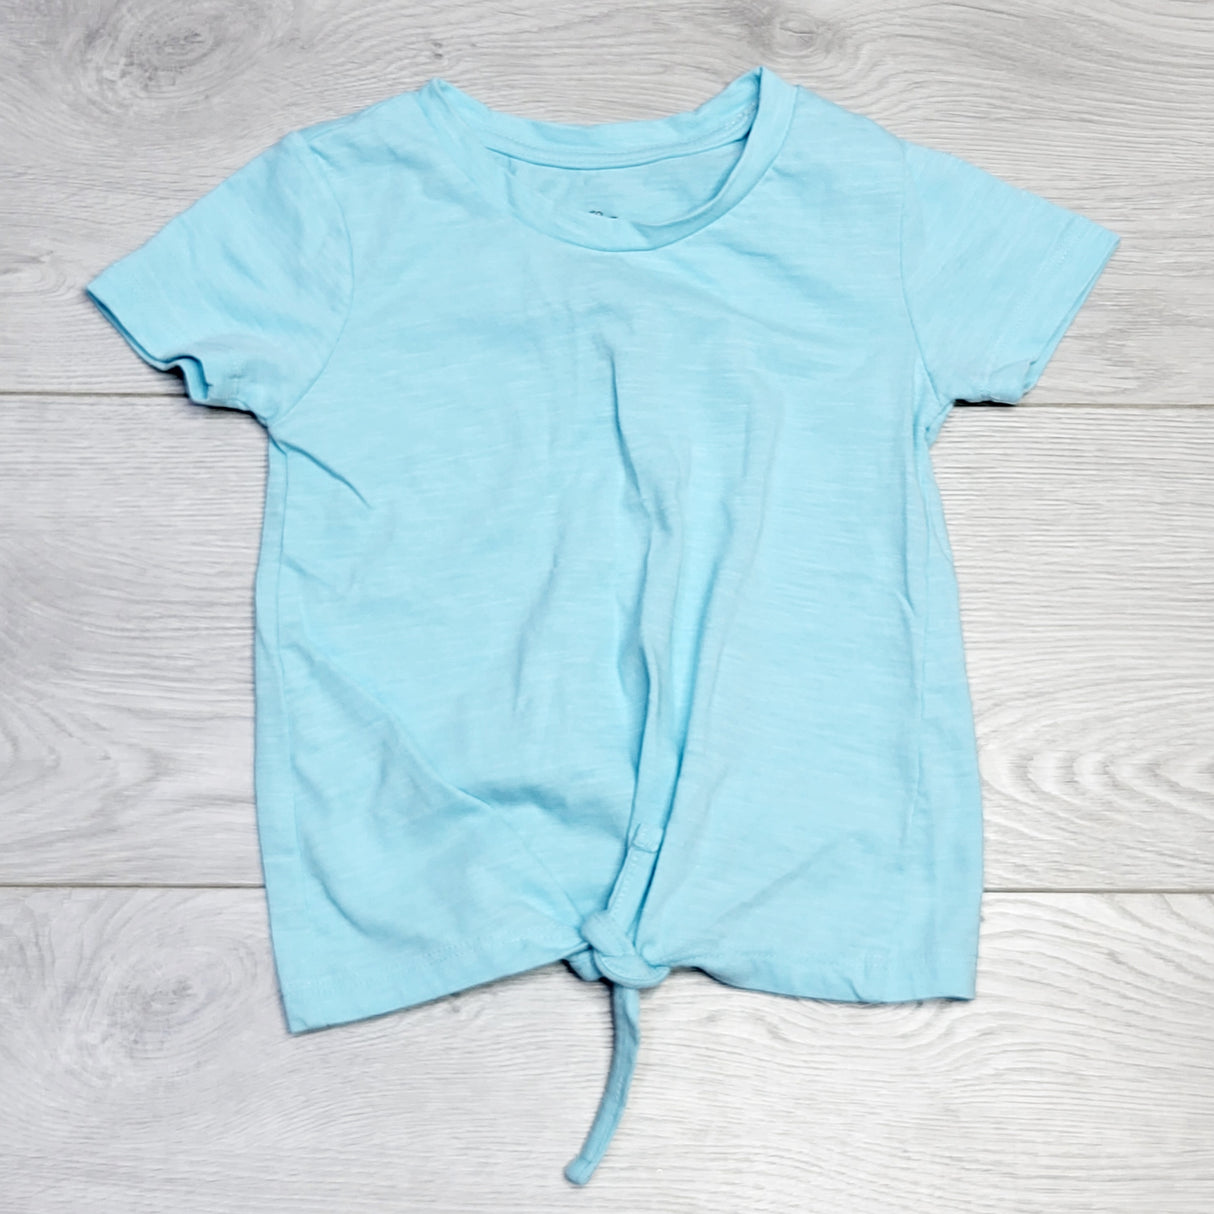 RZA2 - George blue knotted t-shirt. Size 4/5T